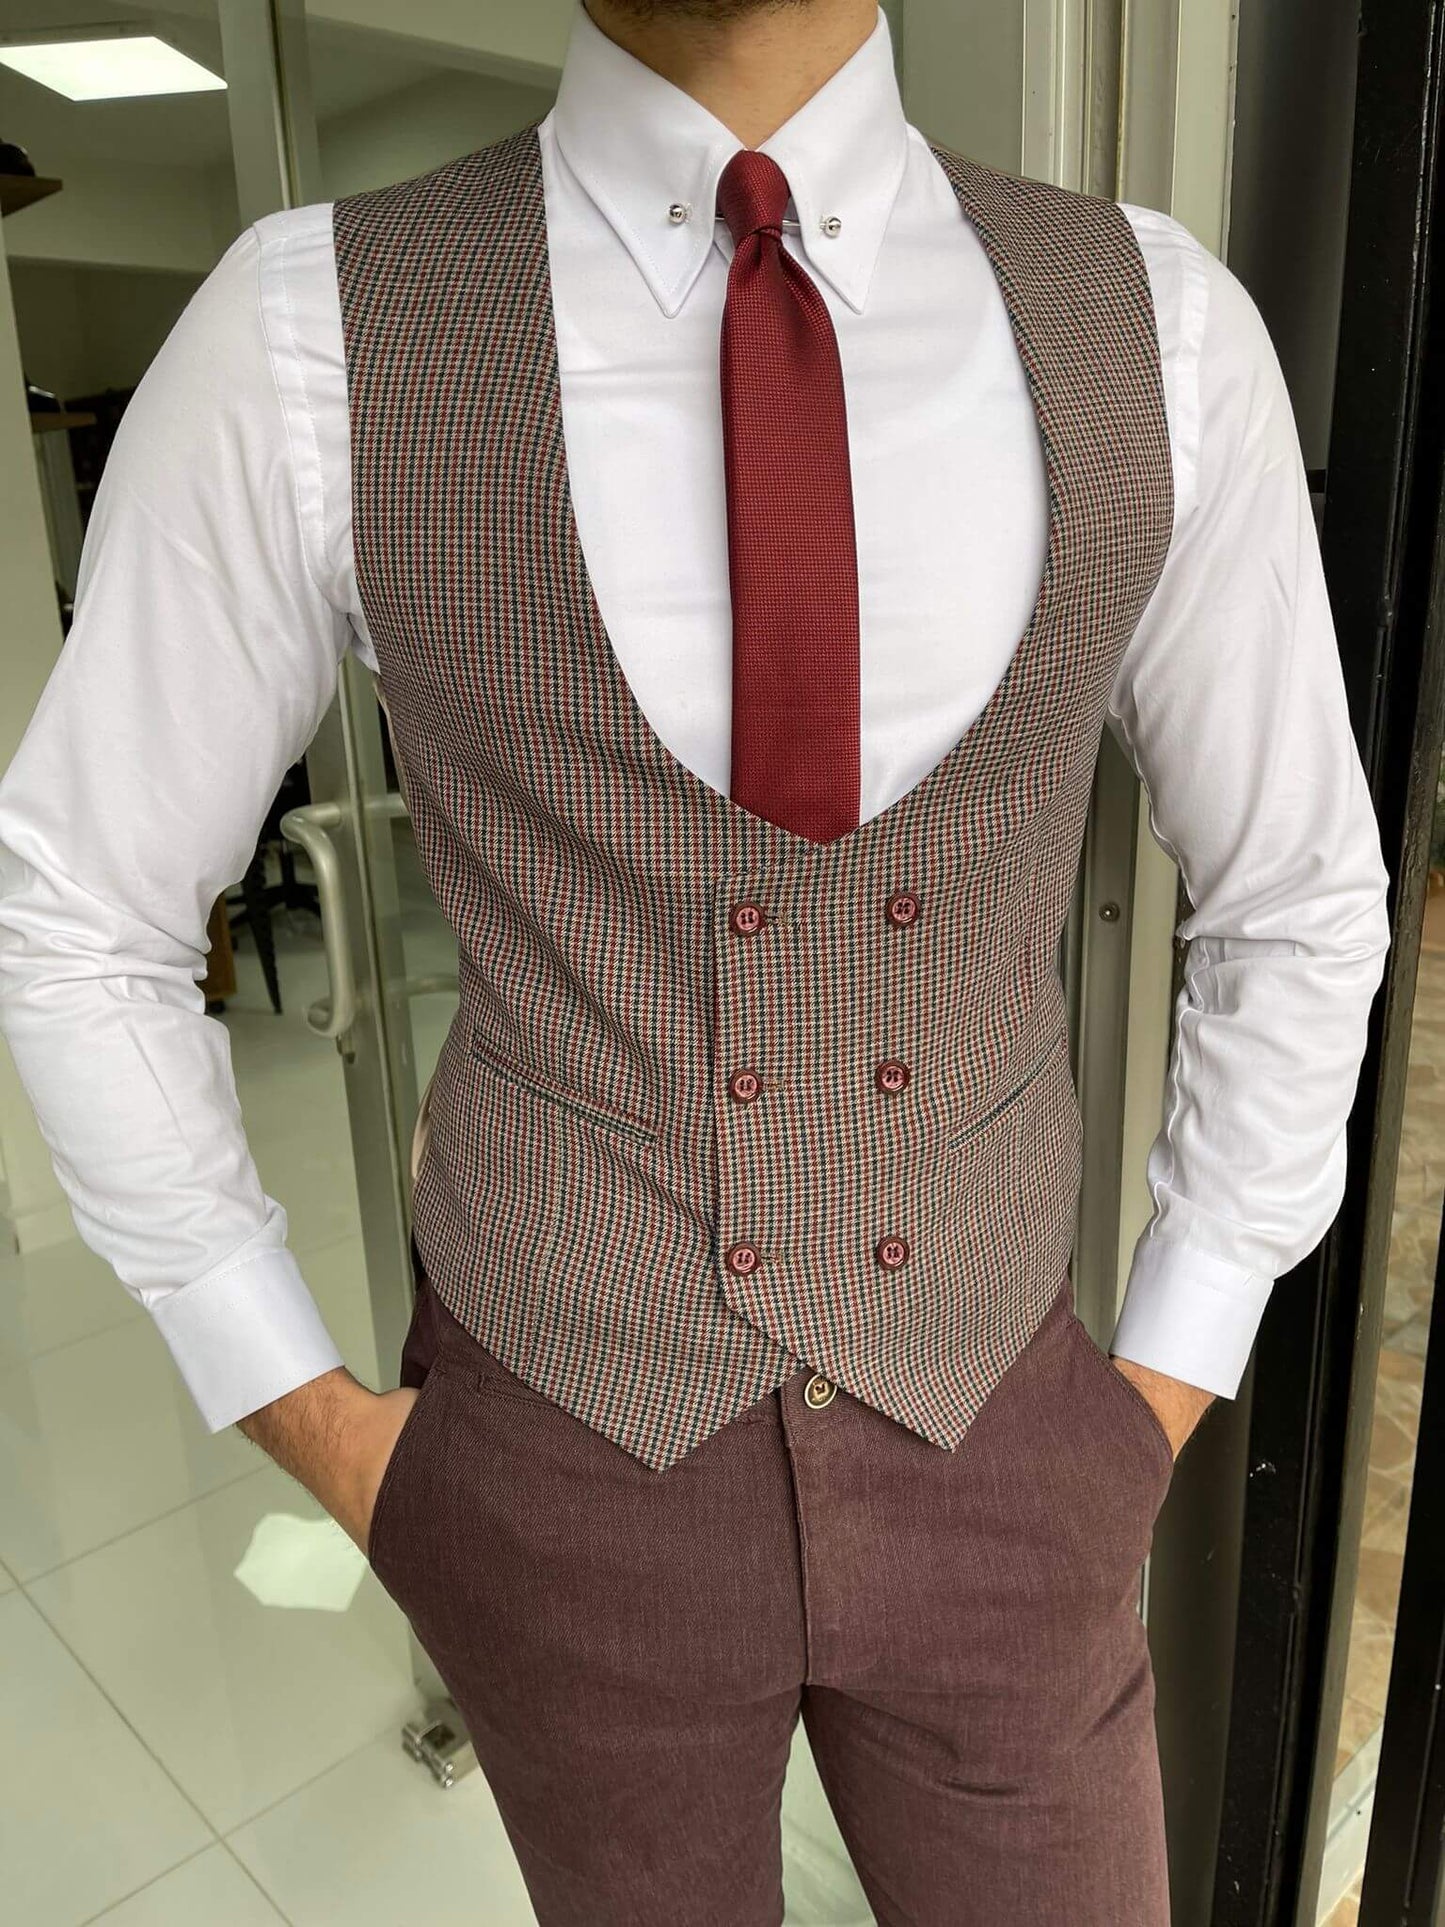 A formal claret red vest with a double-breasted front